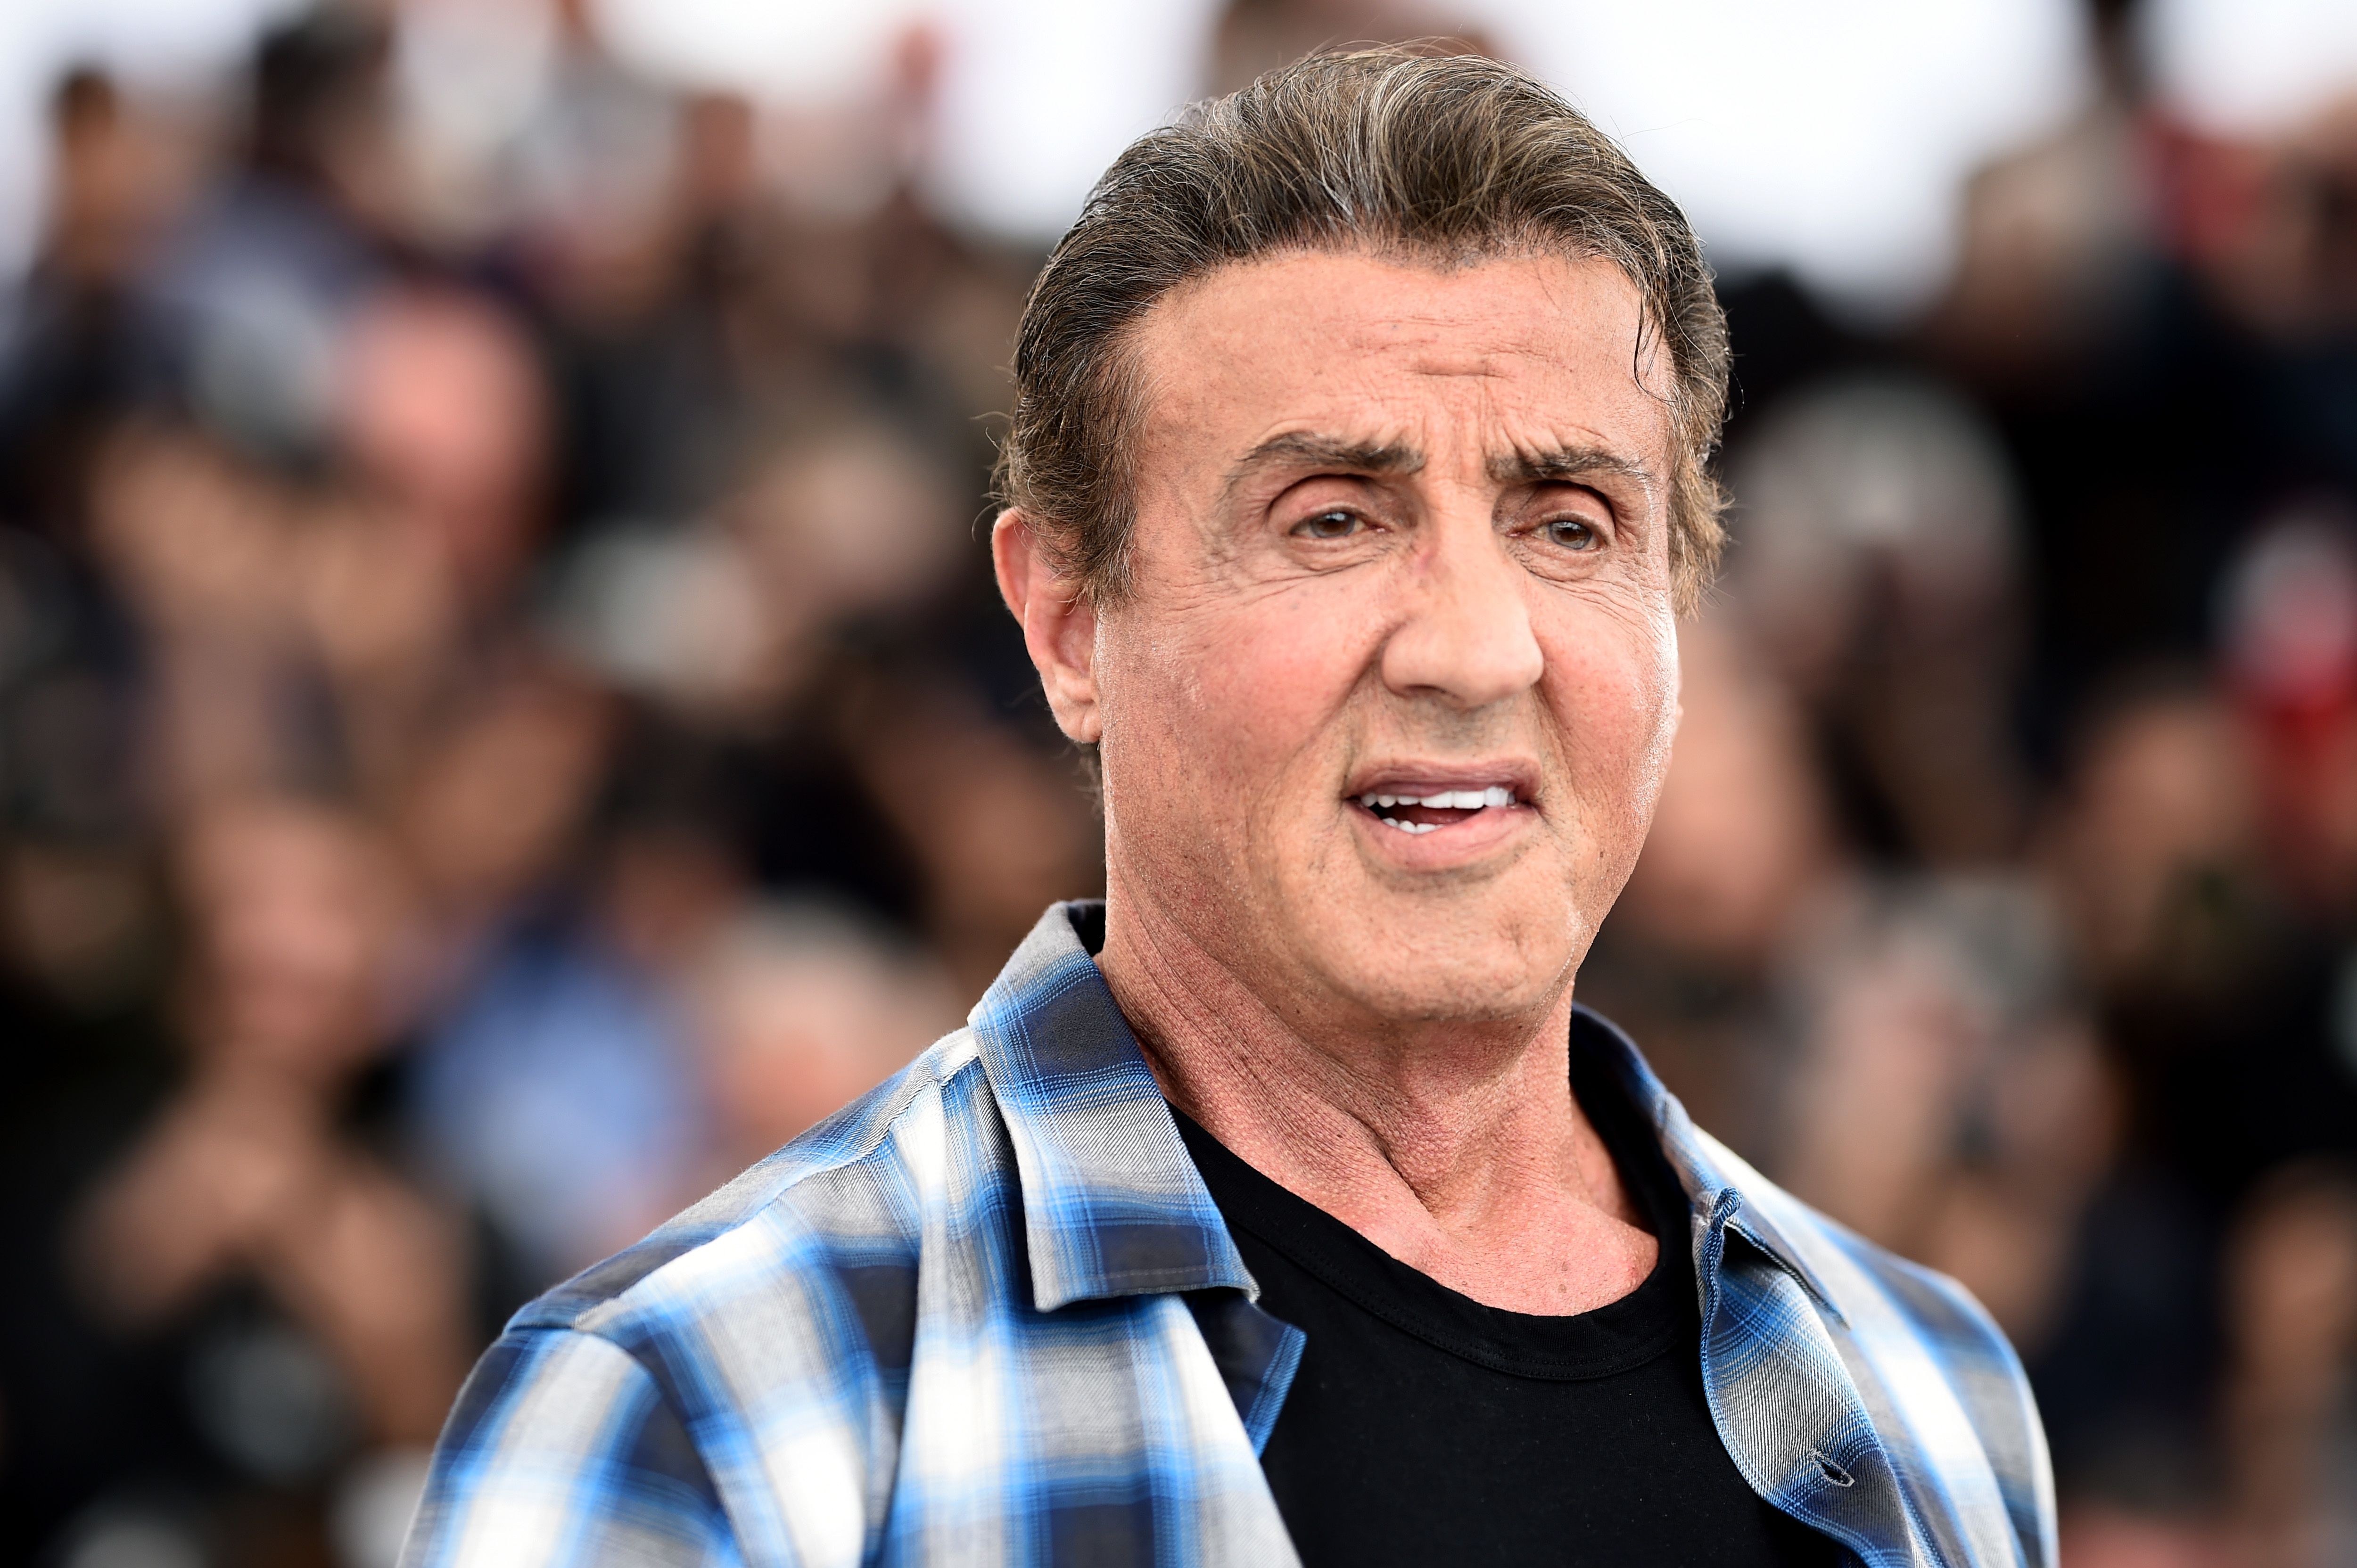 Sylvester Stallone at the photocall for "Sylvester Stallone & Rambo V: Last Blood" during the 72nd annual Cannes Film Festival on May 24, 2019 | Photo: Getty Images